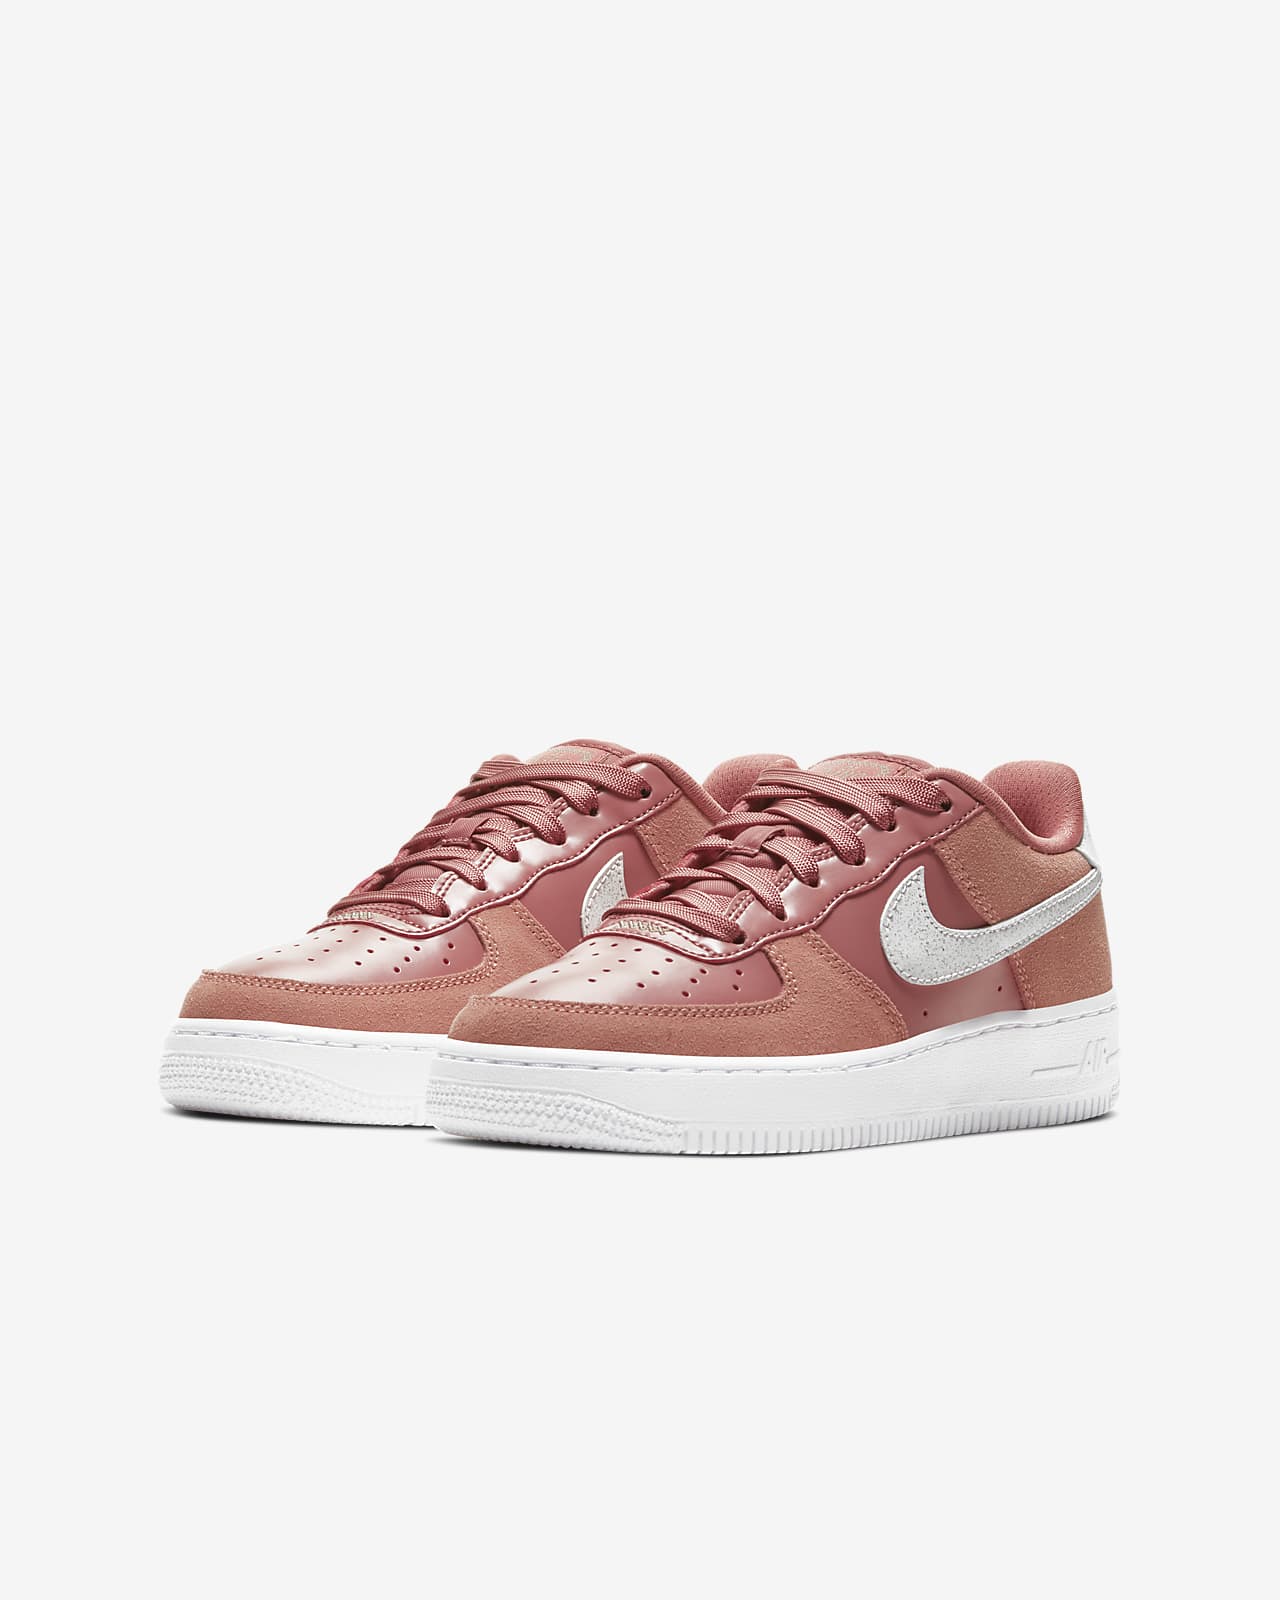 nike air force 1 lv8 valentine's day